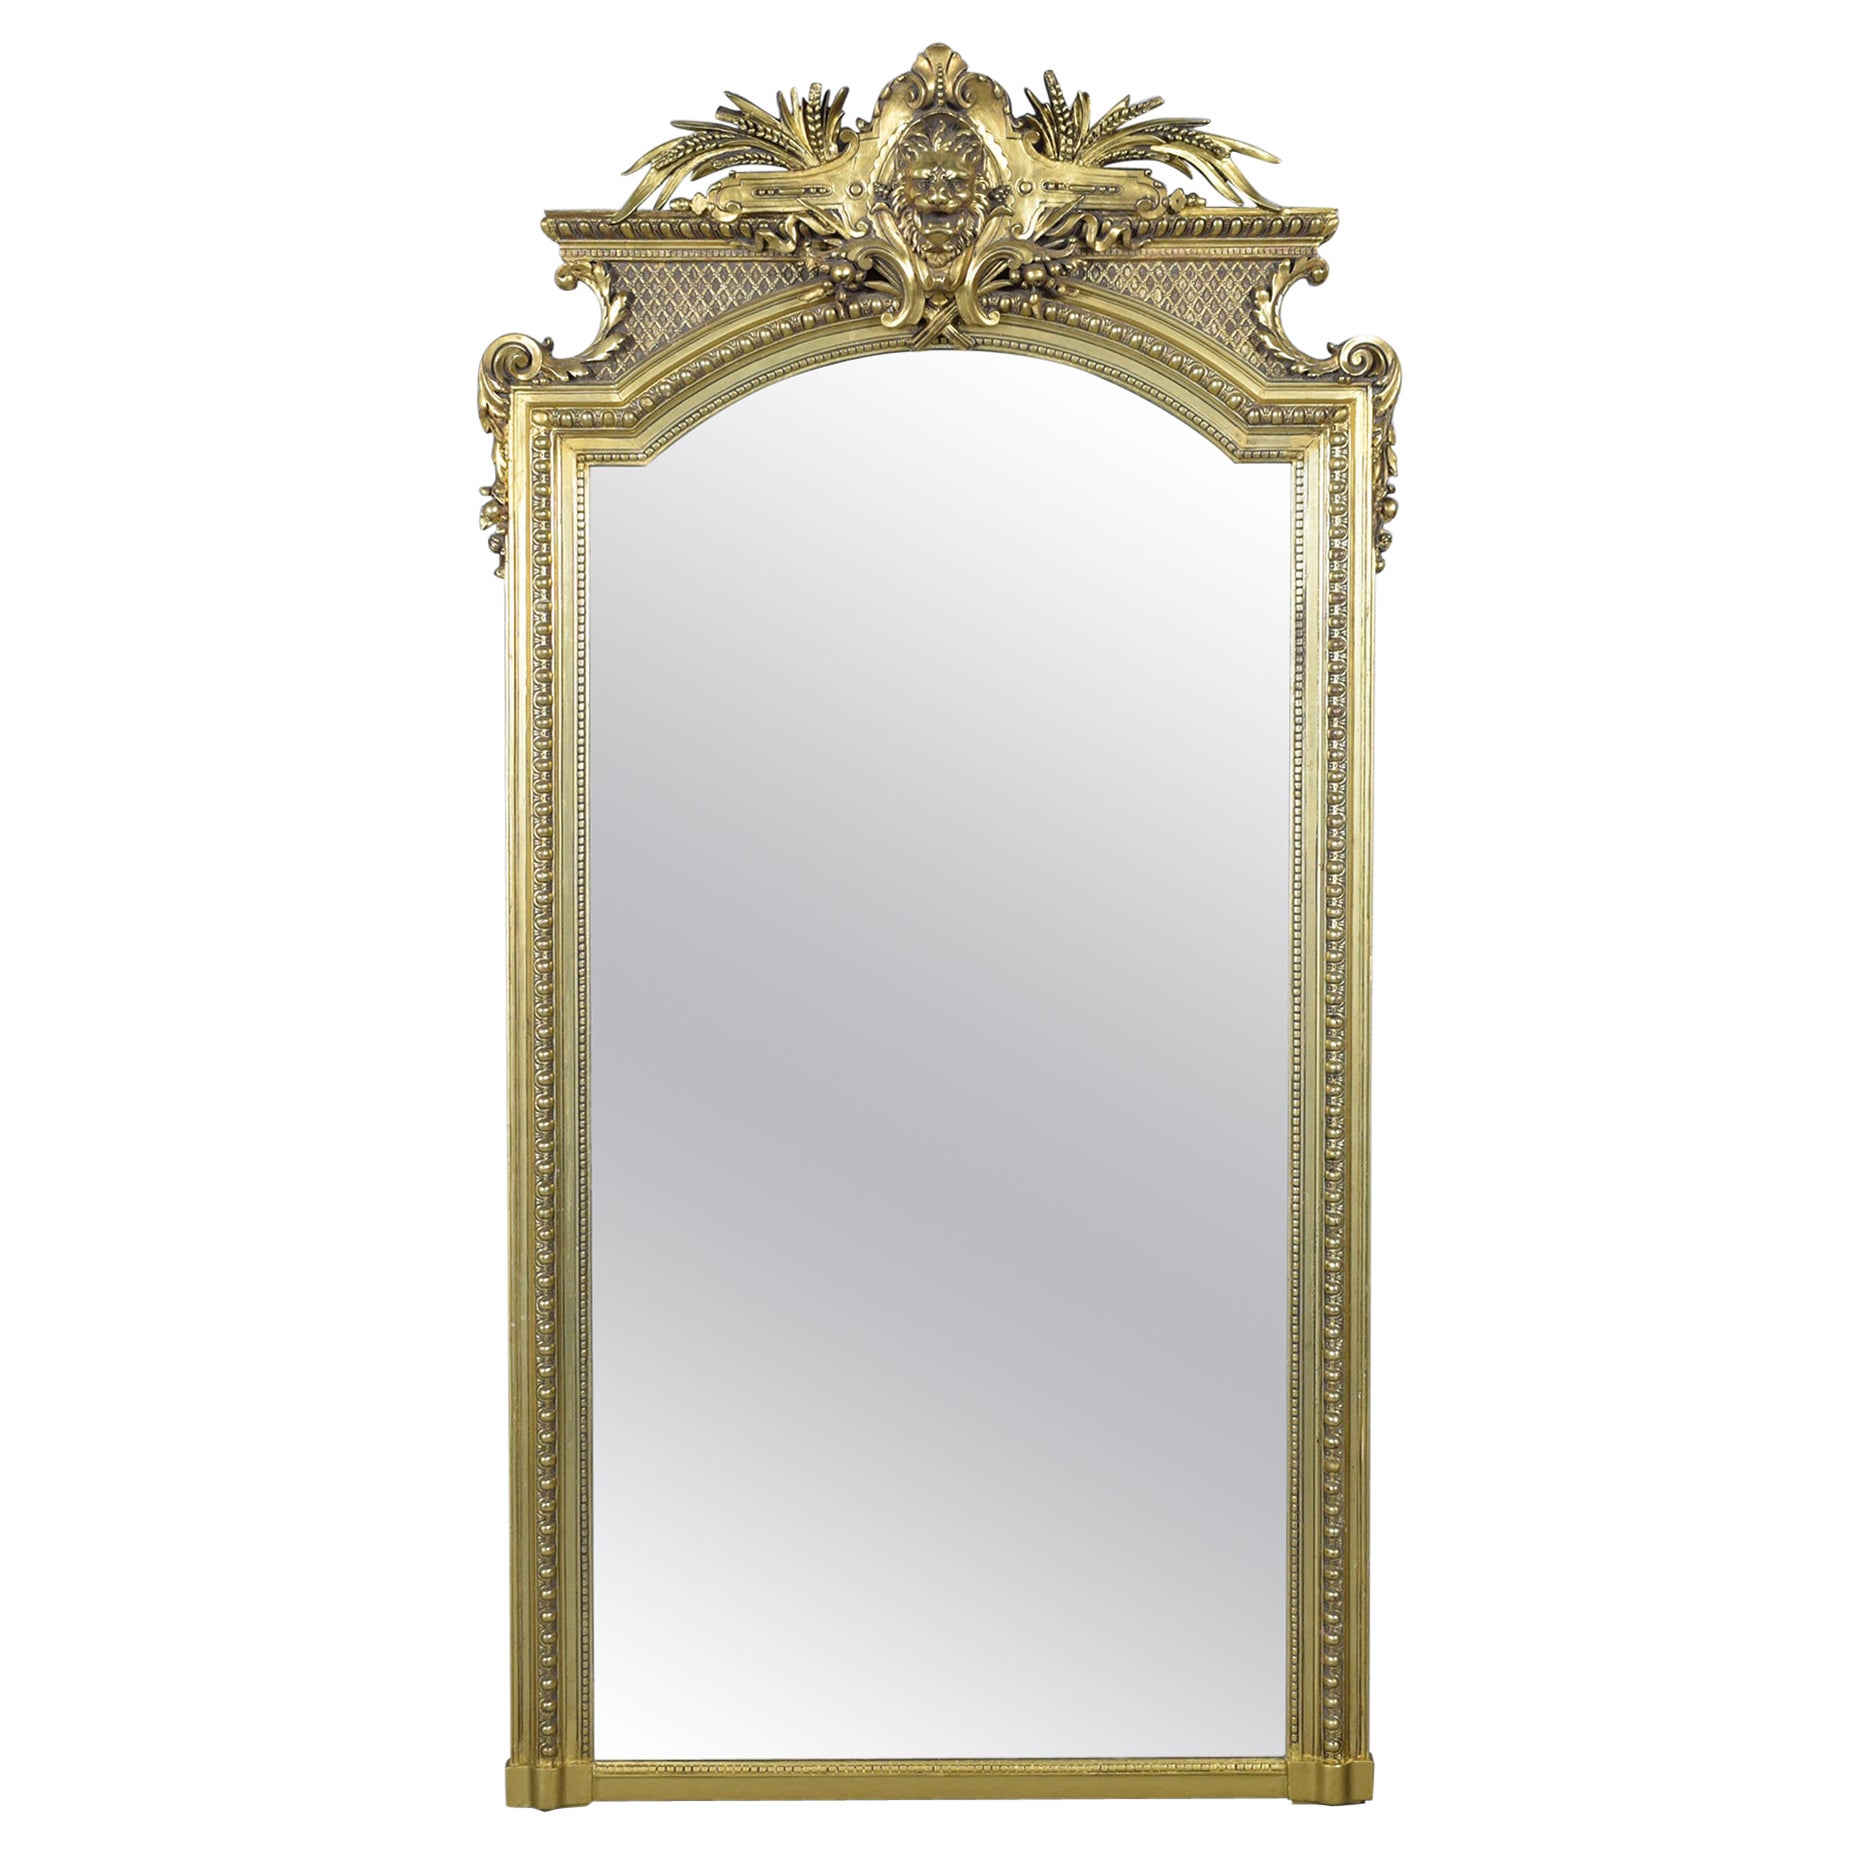 Late 19th-Century French Giltwood Standing Mirror: Restored Elegance For Sale